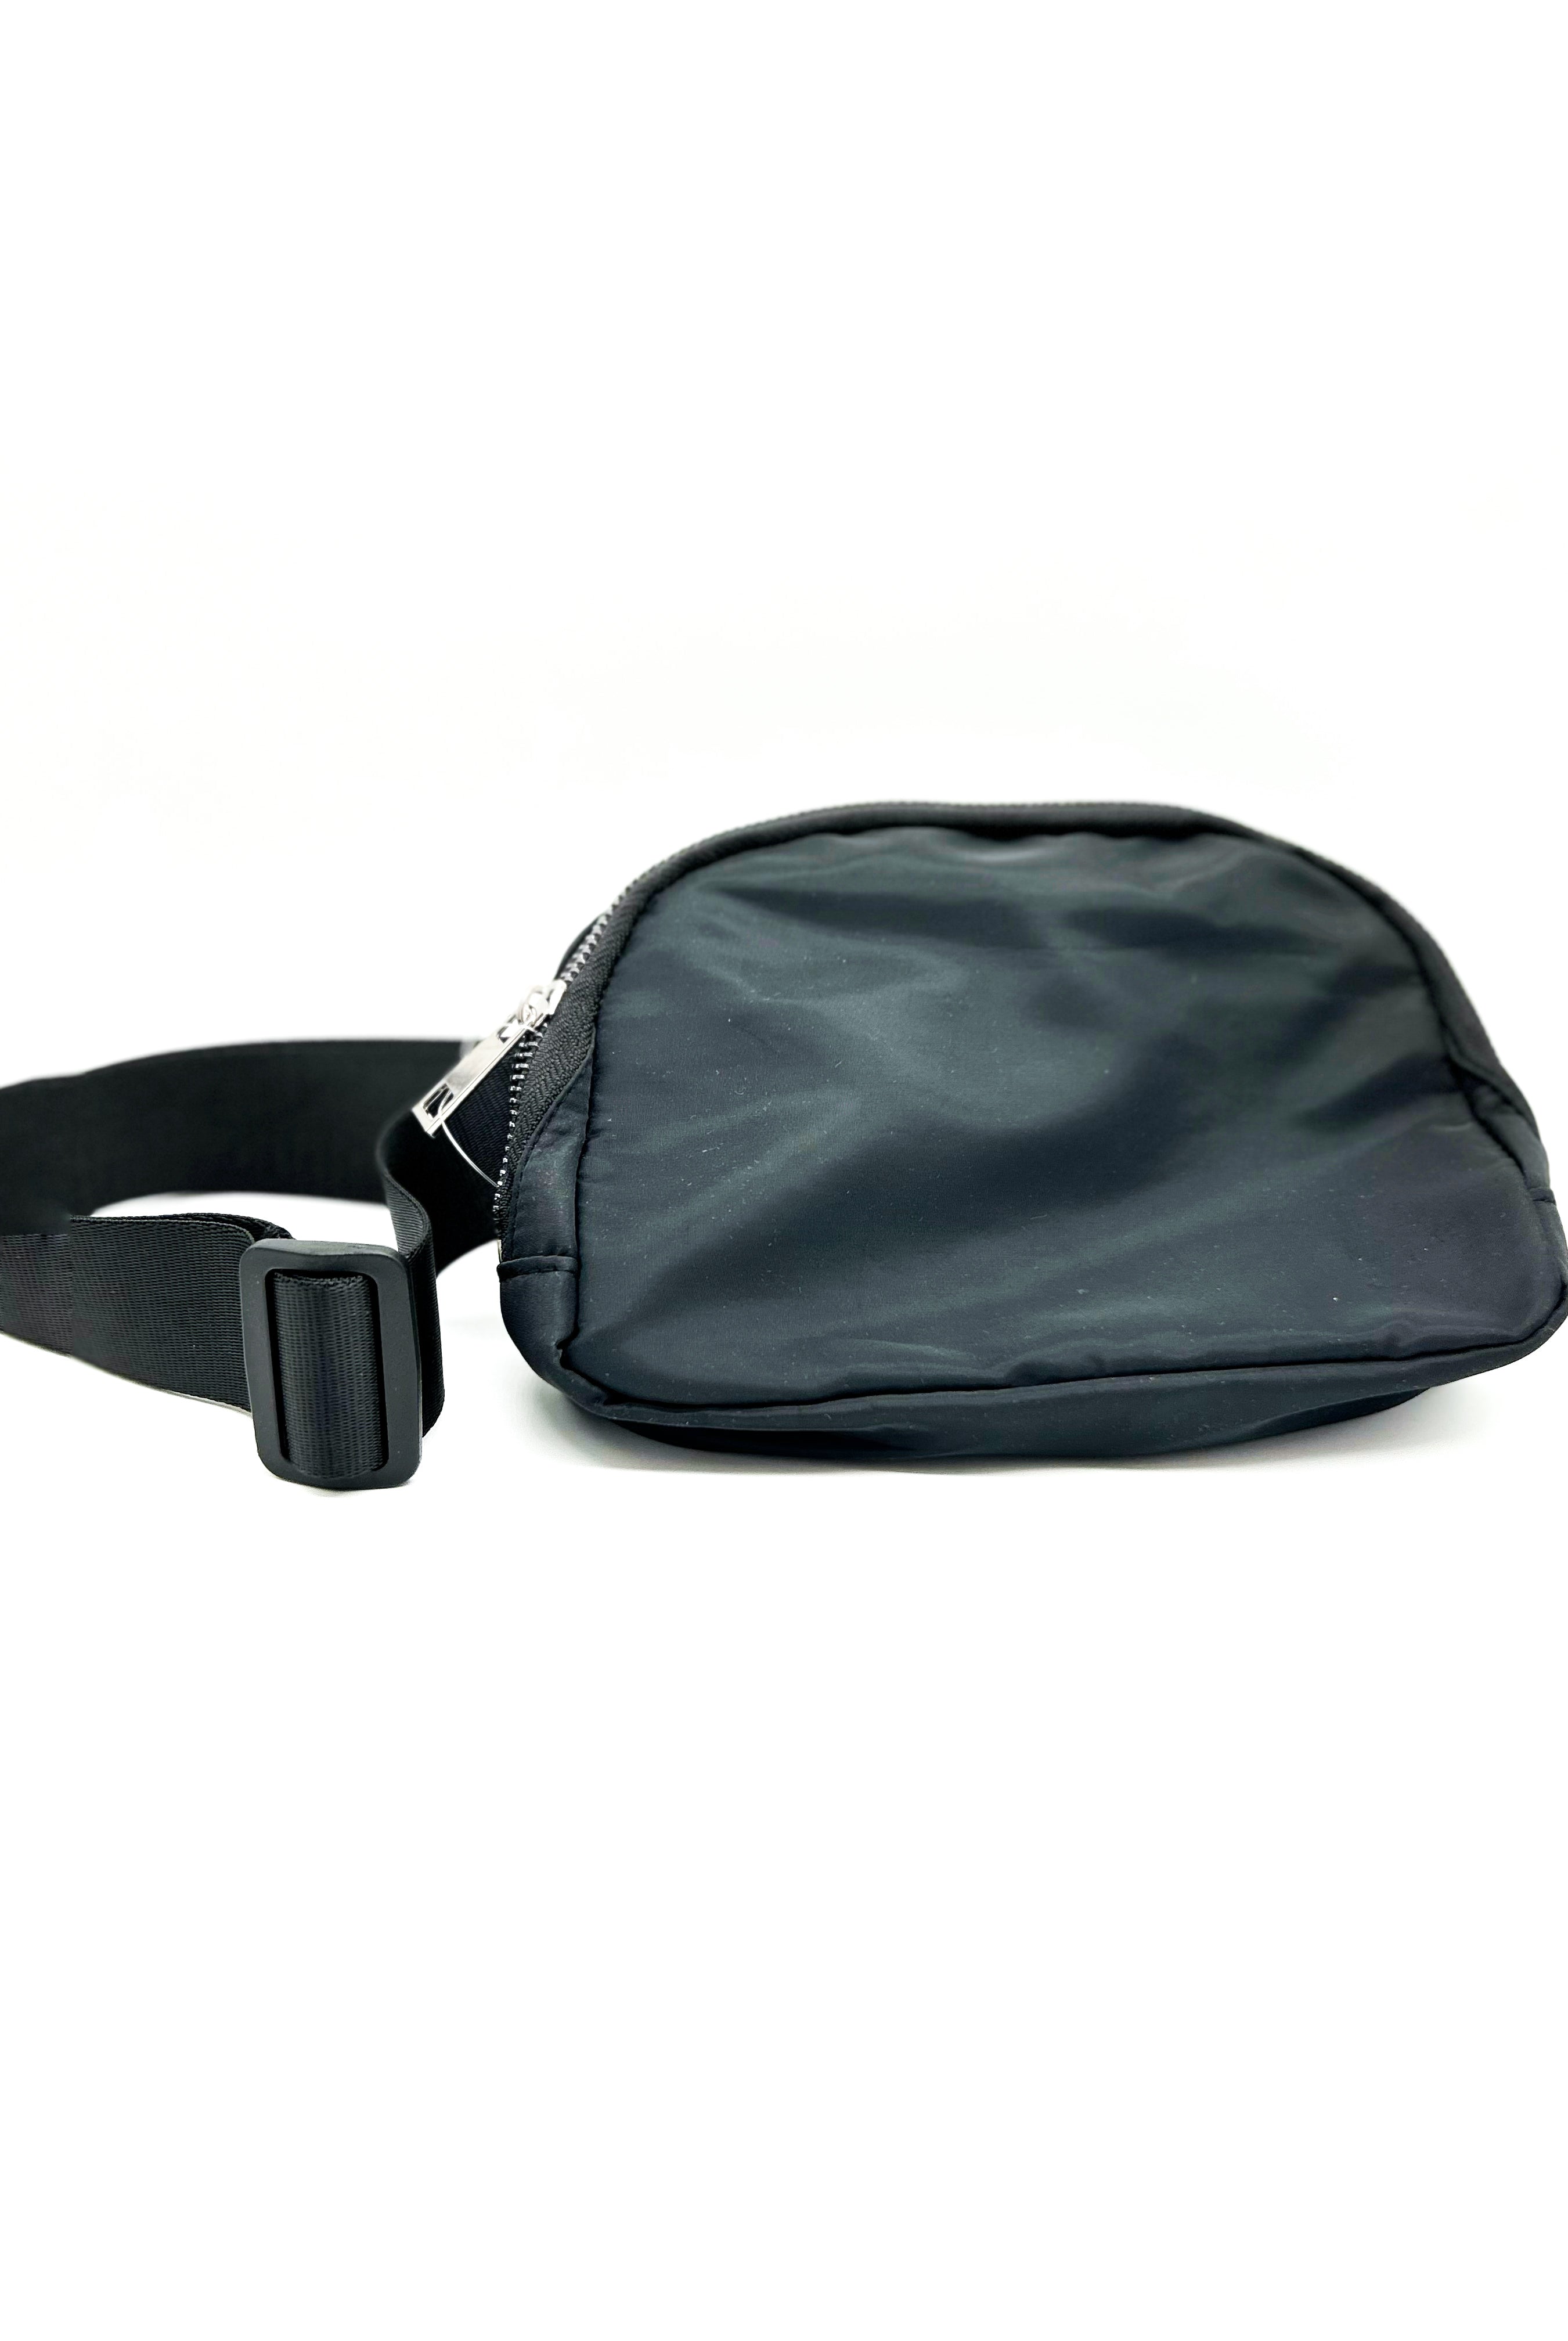 DOORBUSTER: Carry Me Belt Bag-320 Bags-ZENANA-Heathered Boho Boutique, Women's Fashion and Accessories in Palmetto, FL